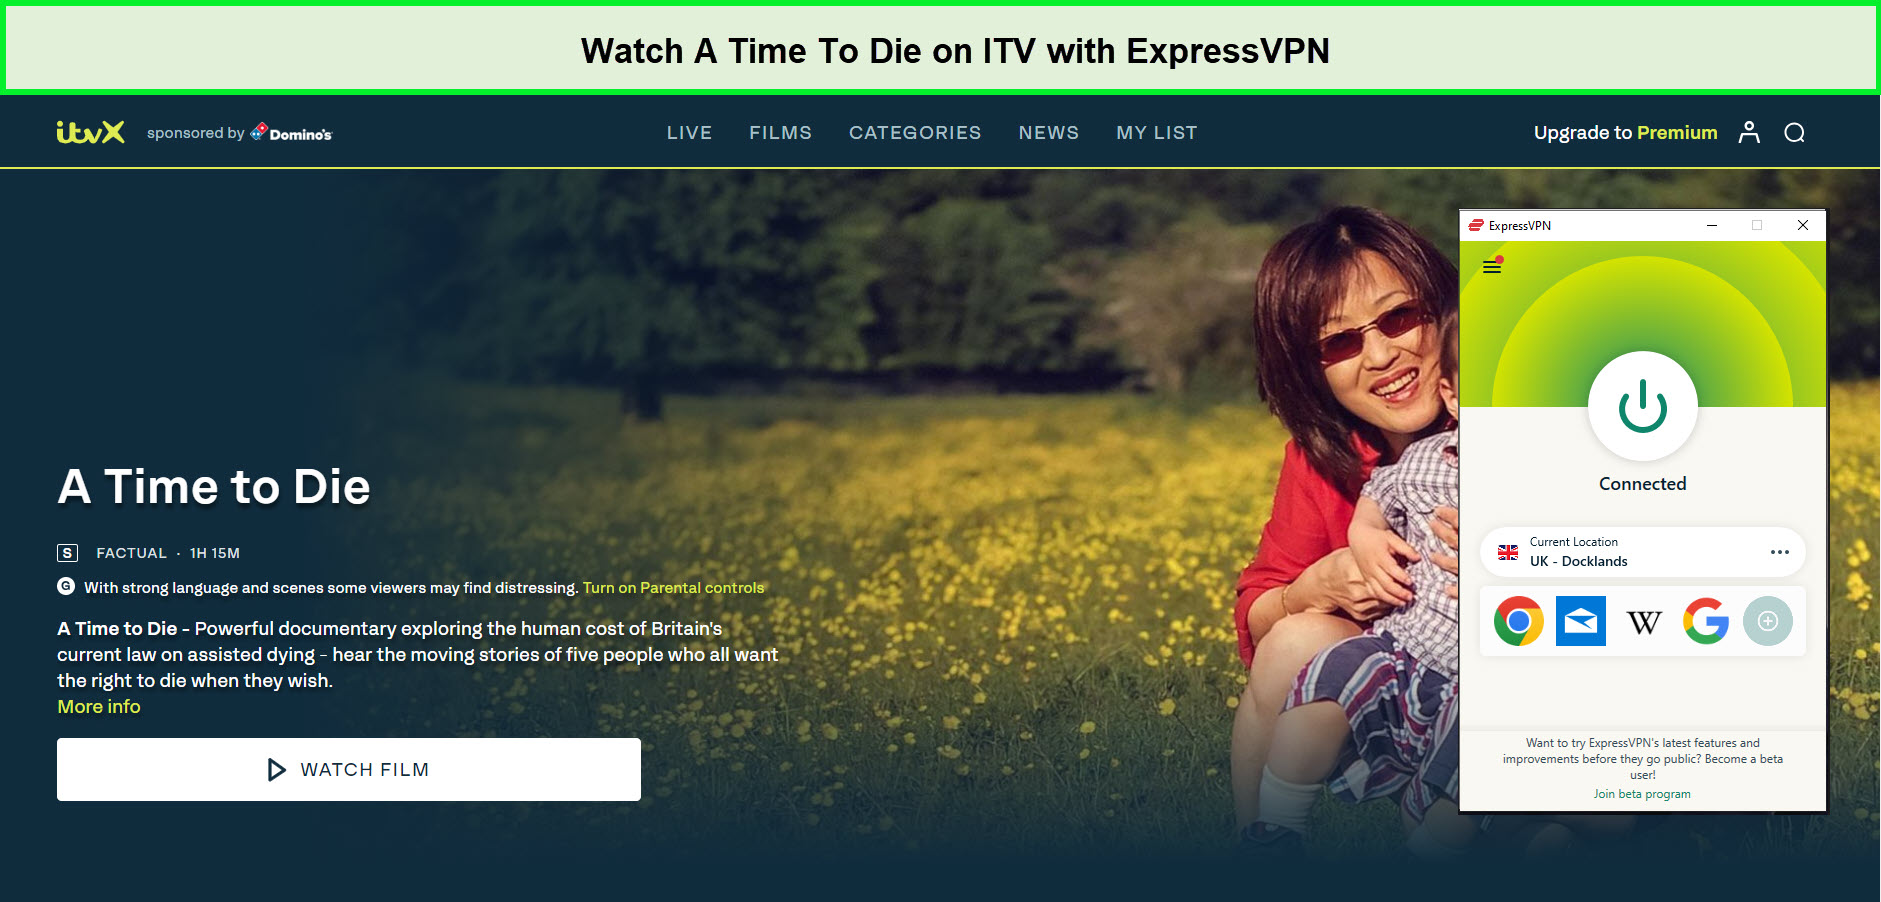 Watch-A-Time-To-Die-in-New Zealand-on-ITV-with-ExpressVPN